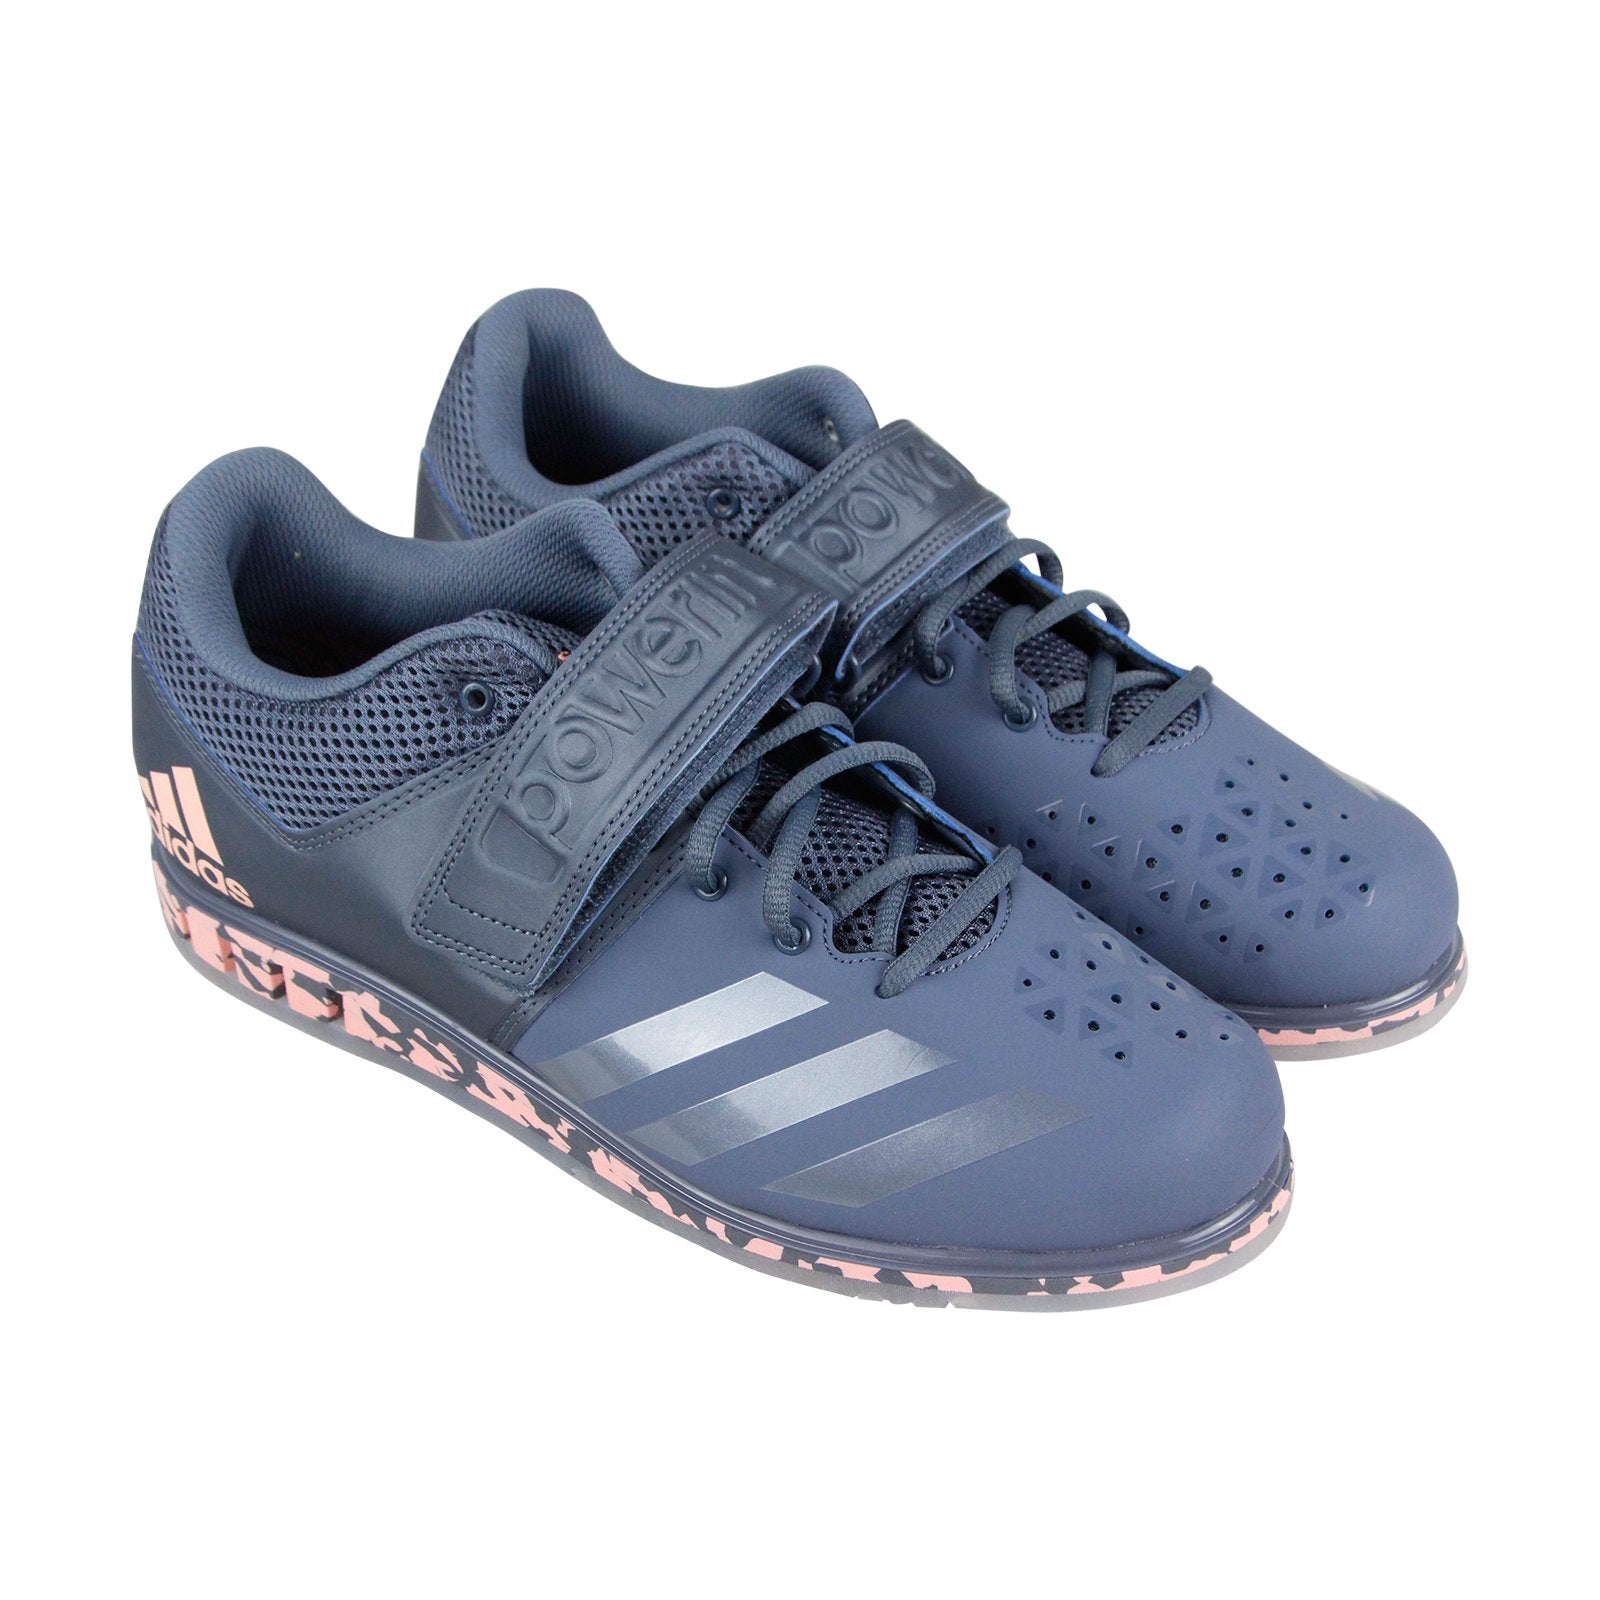 Adidas Powerlift 3.1 AC7471 Mens Blue Lace Up Lifestyle Sneakers Shoes ...